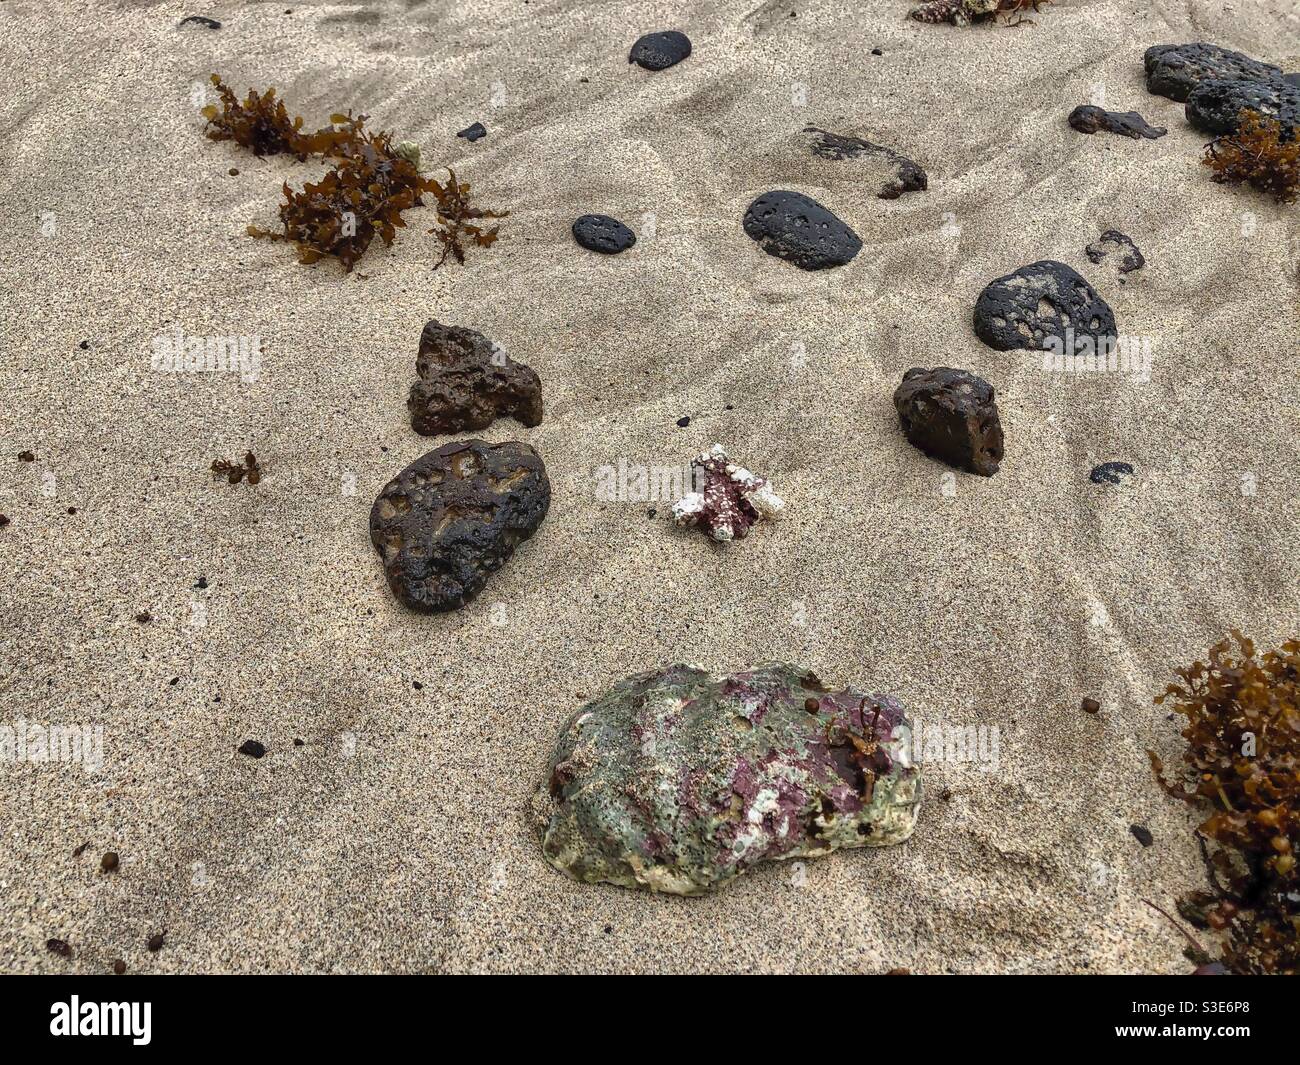 Seashells, stones and seaweed brought by storm on a sandy beach in Mauritius. Stock Photo